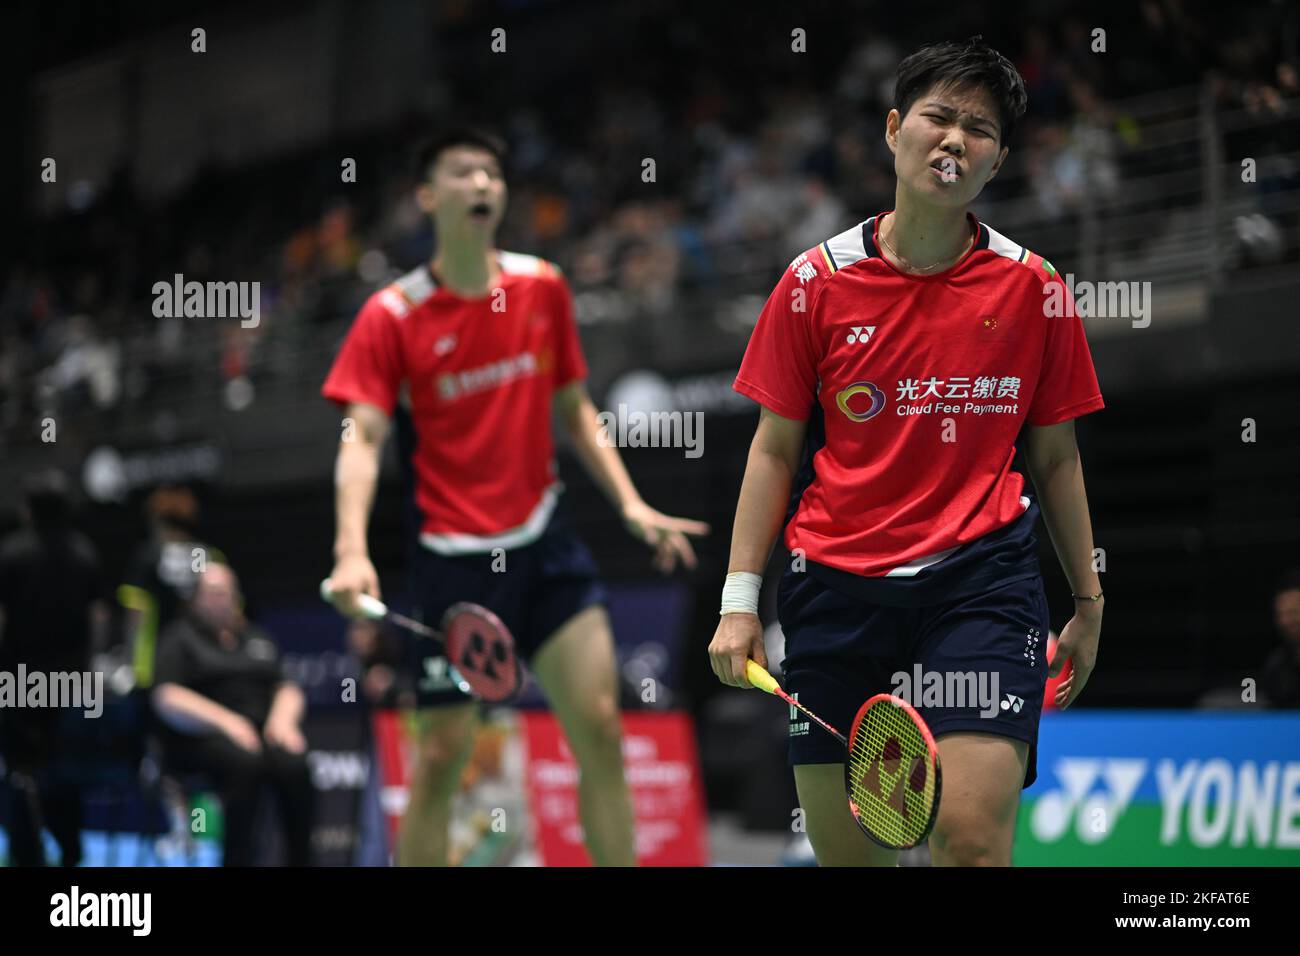 Sydney, Australia. 17th Nov, 2022. Feng Yan Zhe (L) and Huang Dong Ping (R) of China seen during the 2022 SATHIO GROUP Australian Badminton Open mixed double round of 16 match against Young Hyuk Kim and Lee Yu Lim of Korea. Feng and Huang won the match 12-21, 21-14, 21-15. Credit: SOPA Images Limited/Alamy Live News Stock Photo